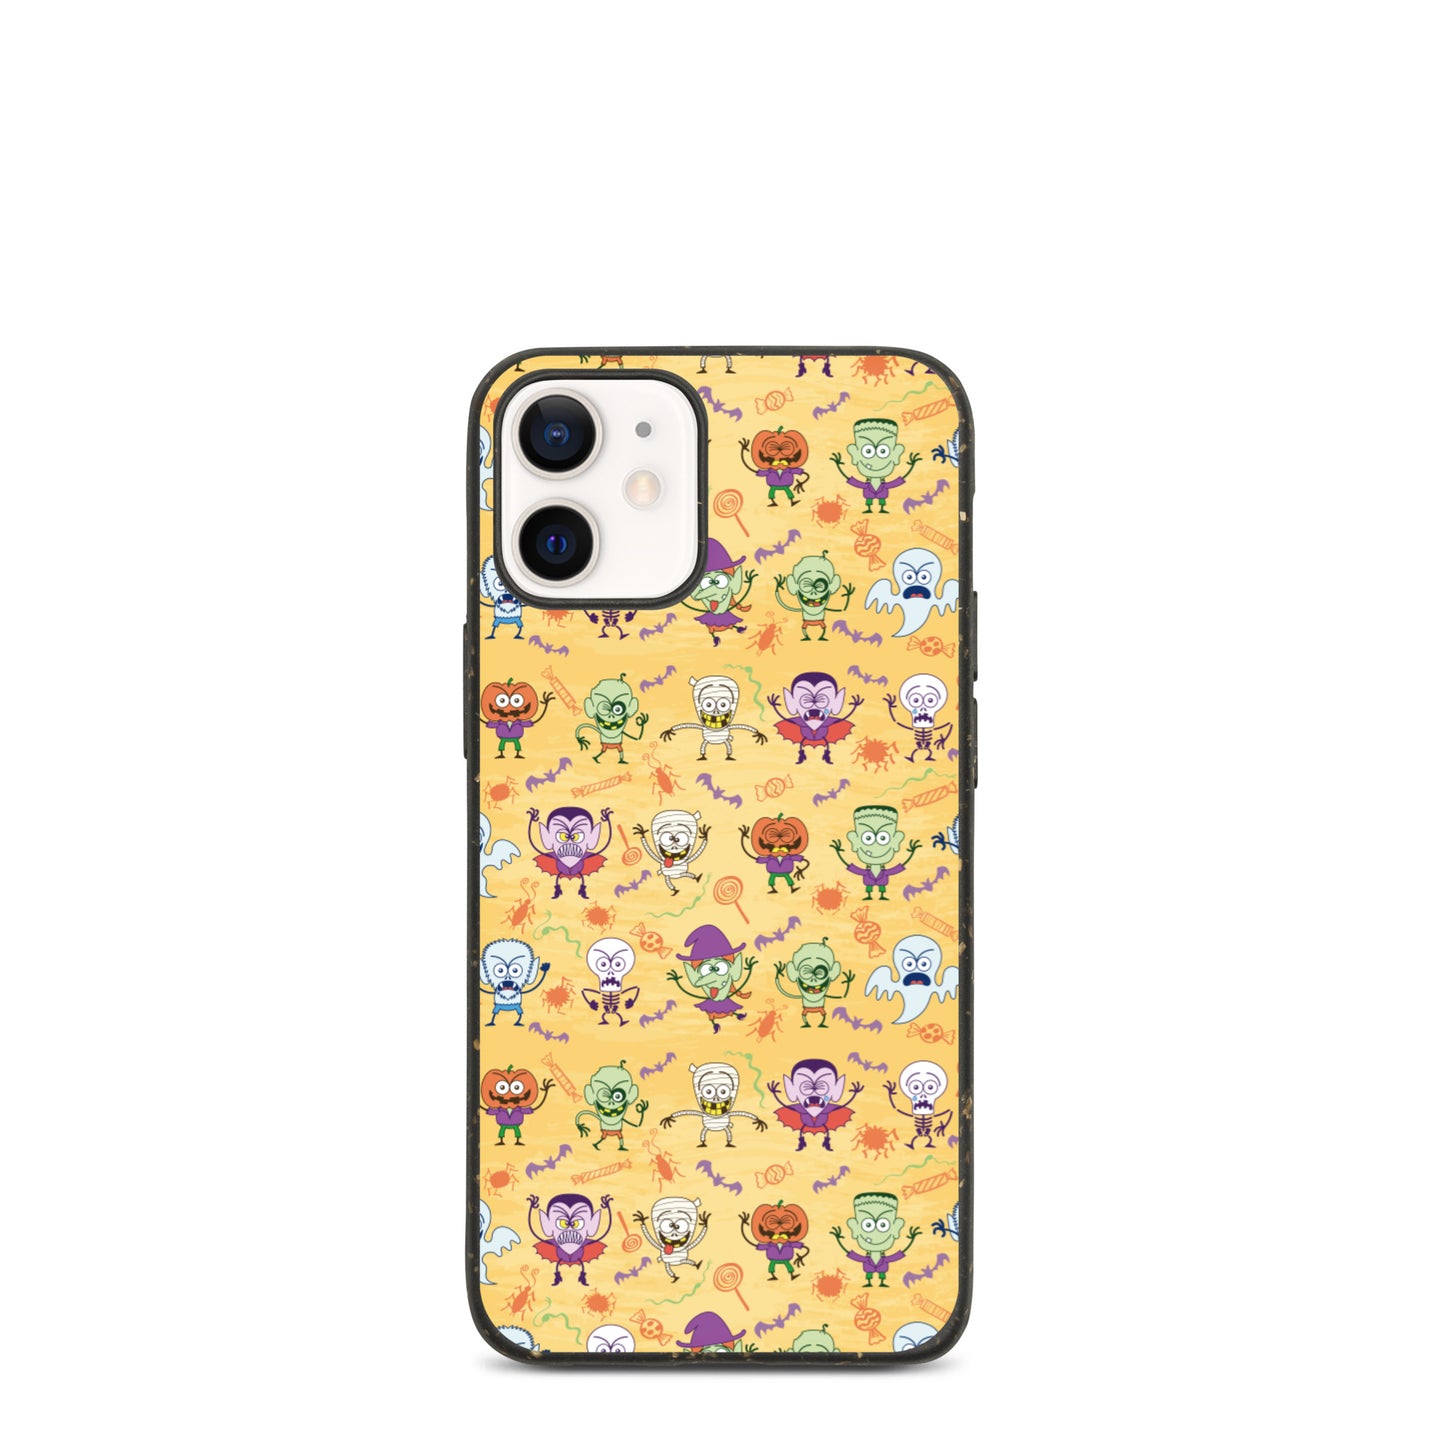 Halloween characters making funny faces Speckled iPhone case. IPhone 12 mini